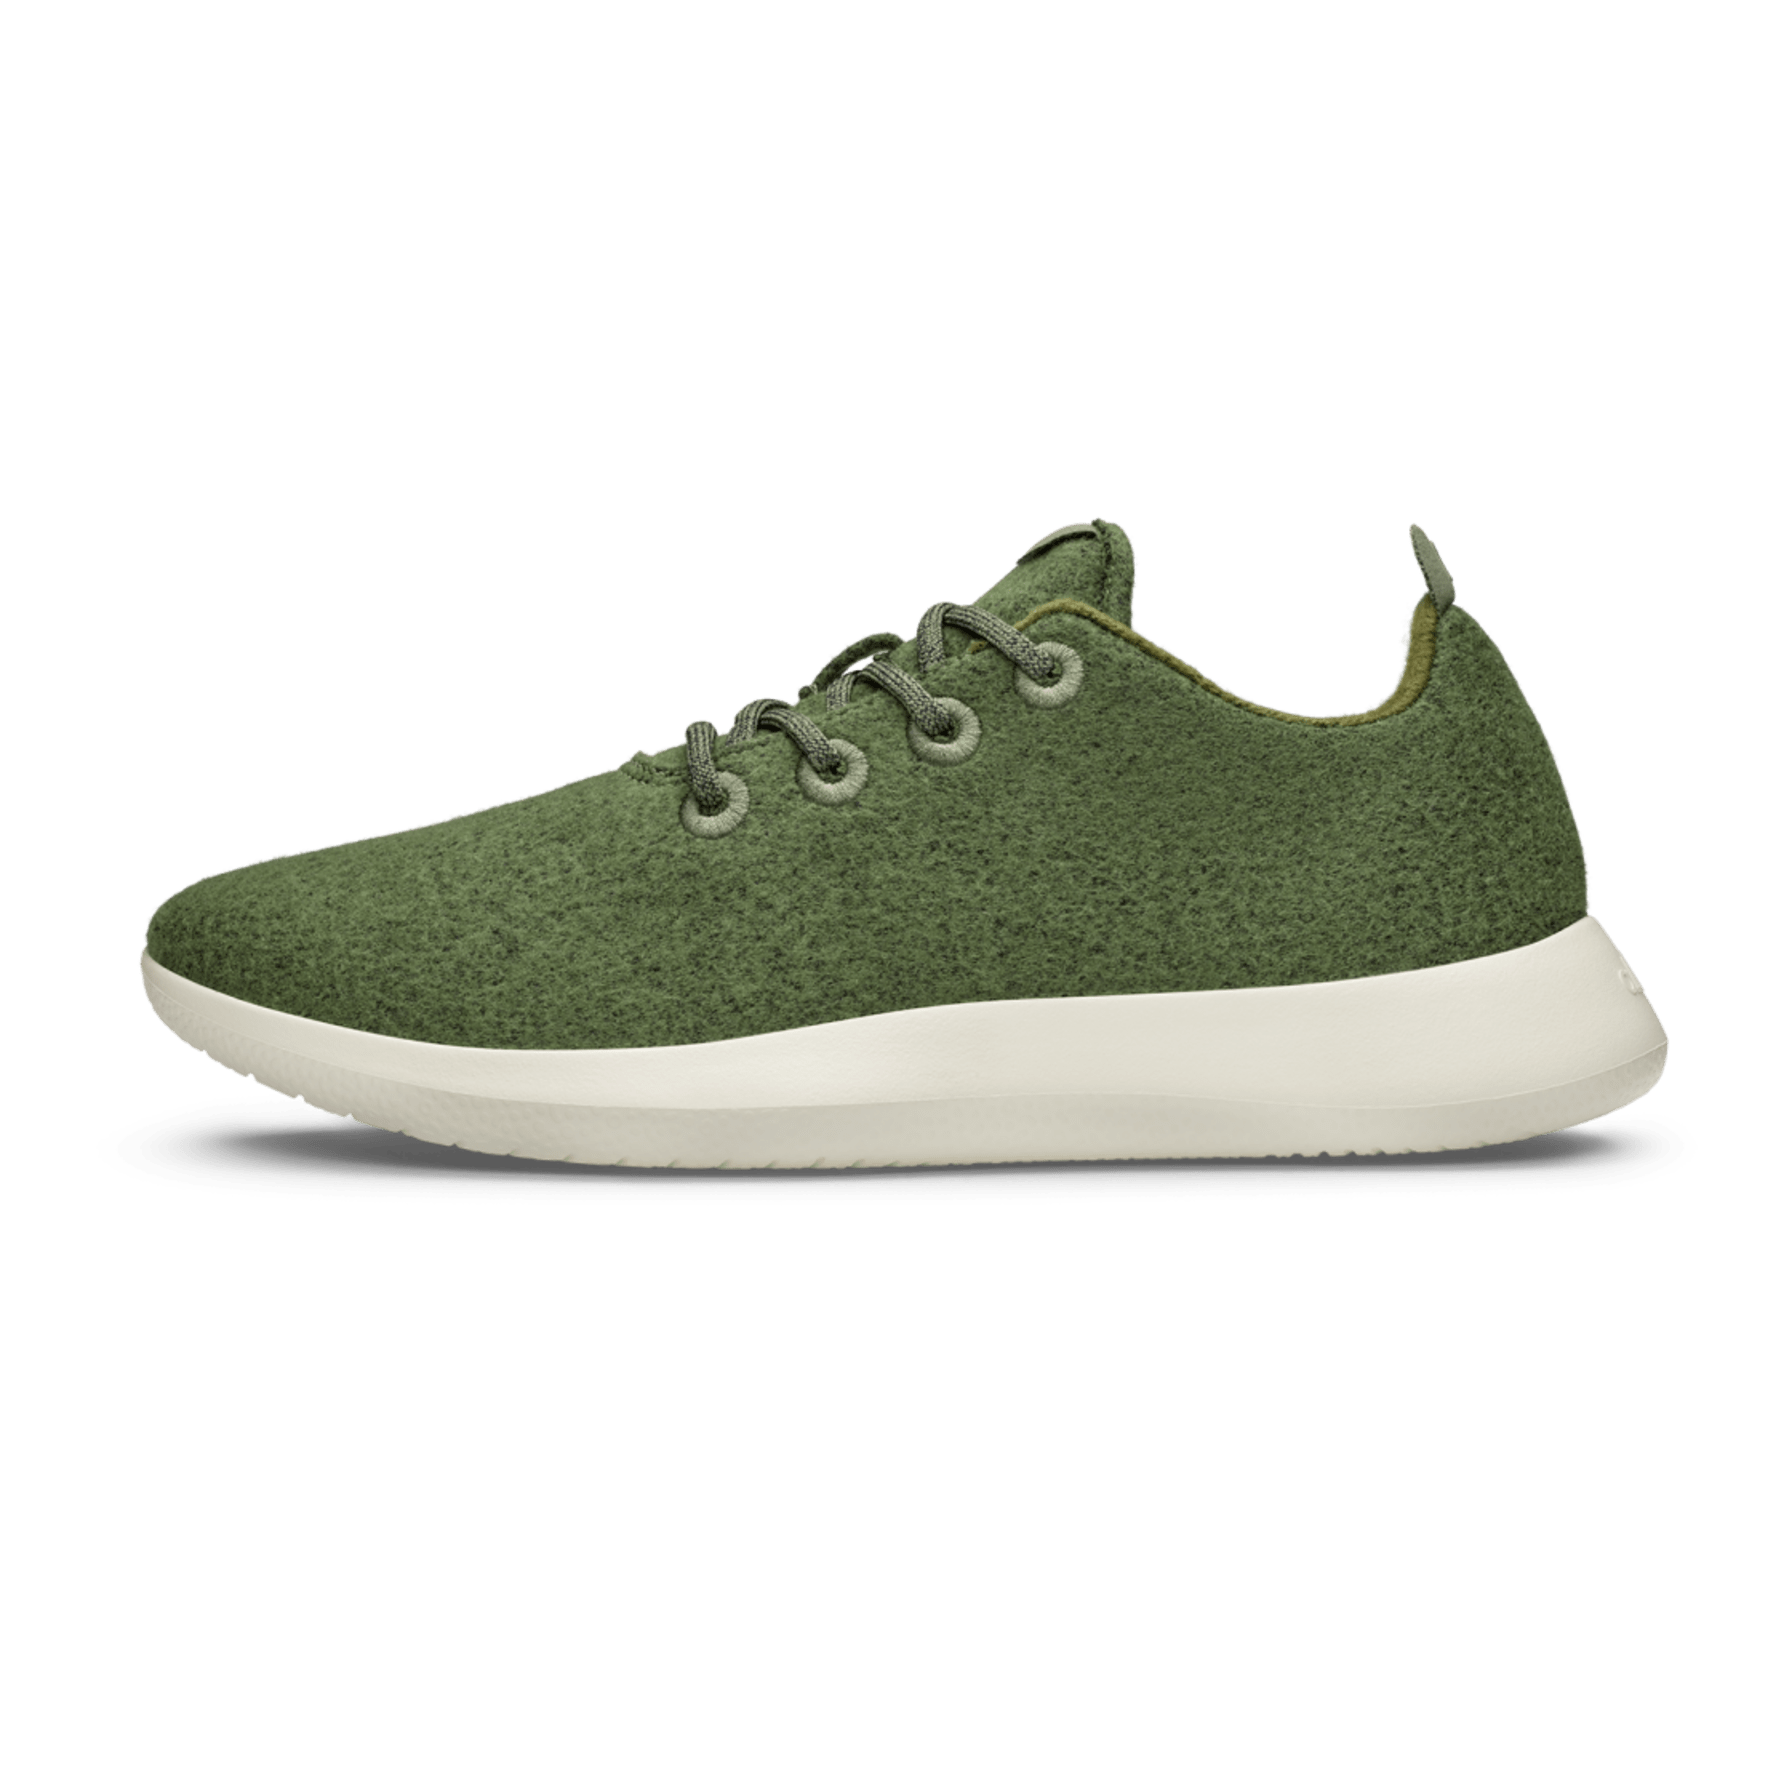 Wool Runners for Women, Everyday Sneakers